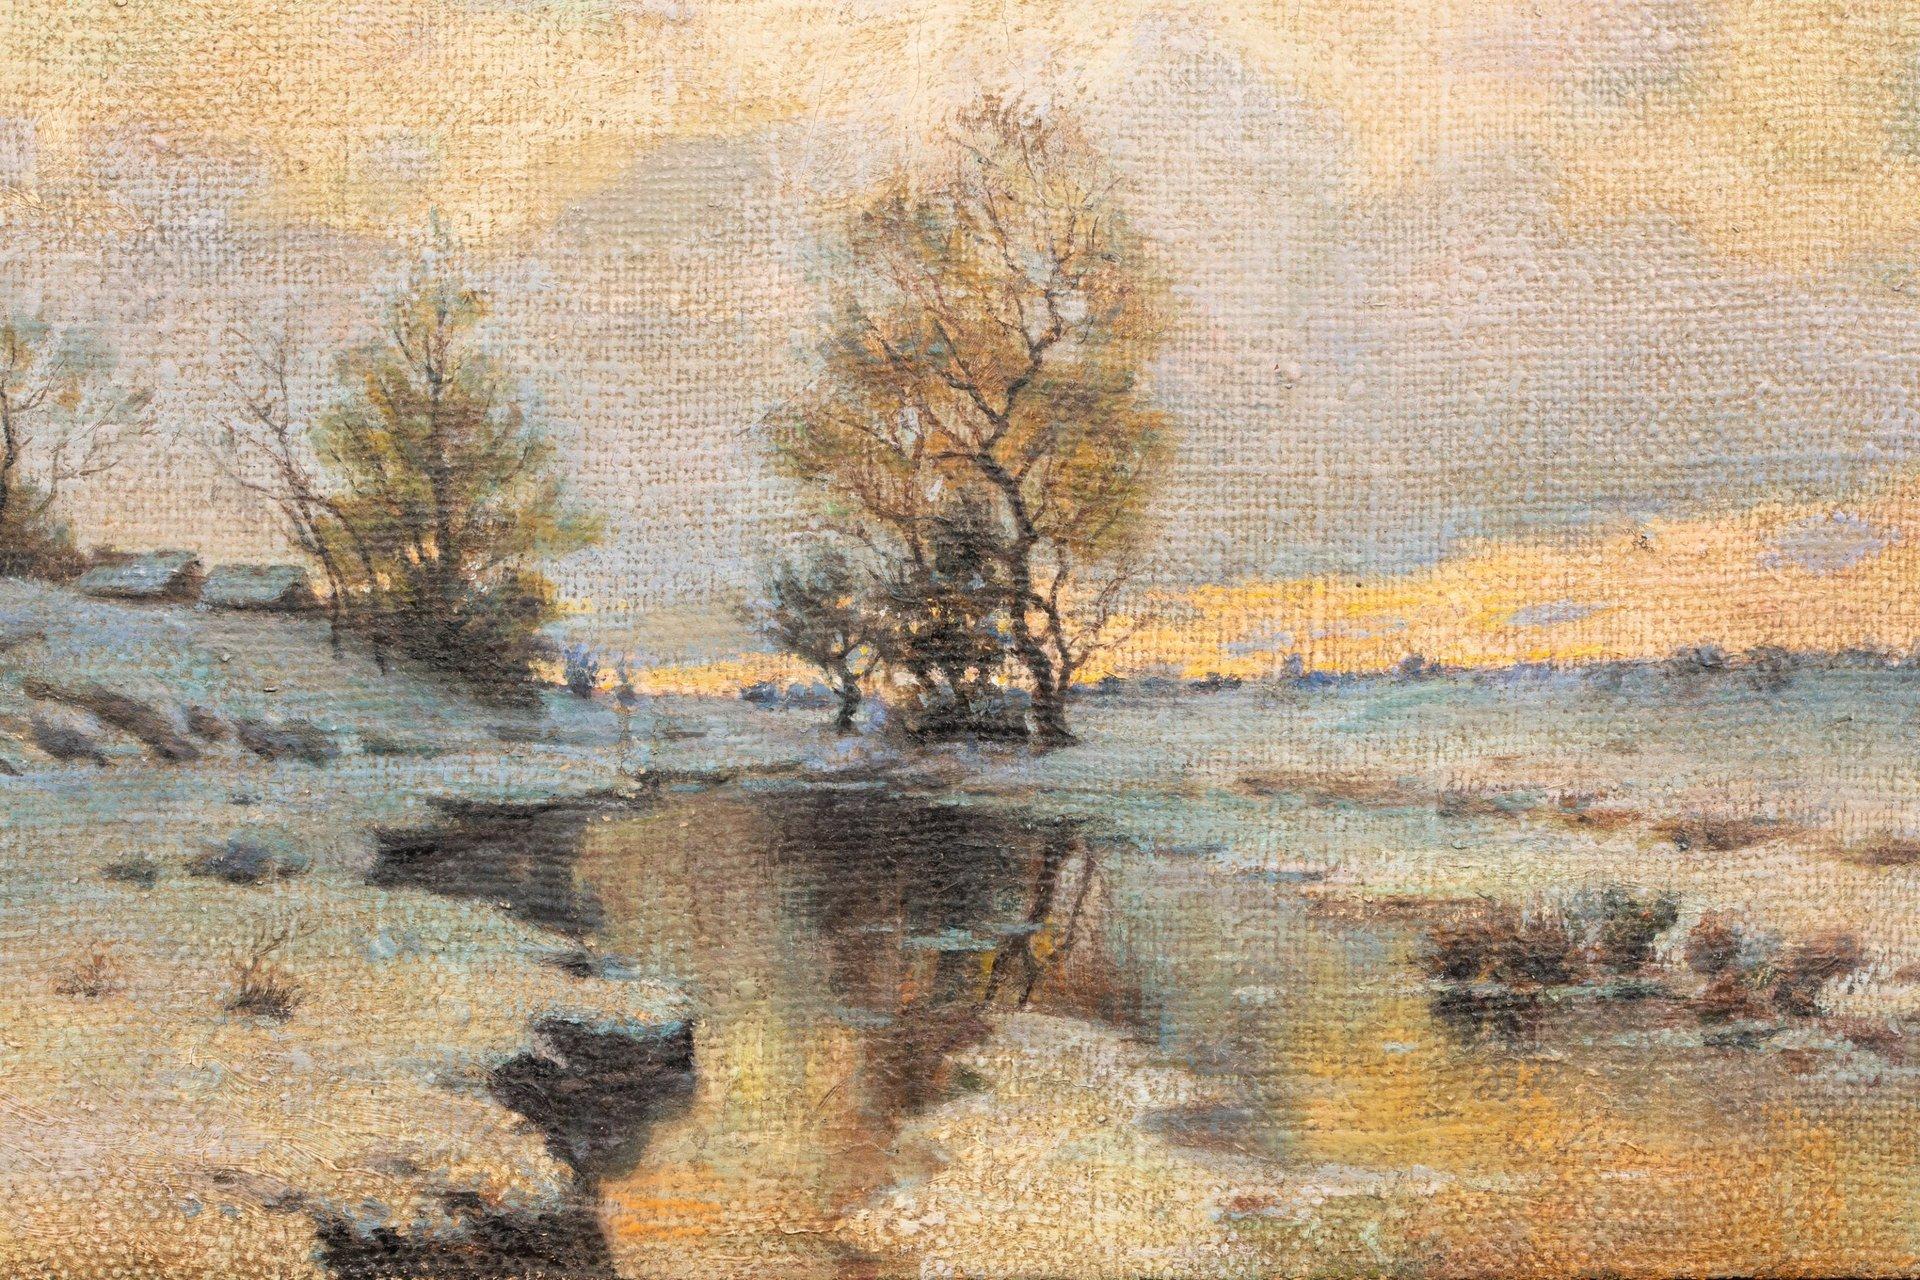 Early spring (Sketch), oil on jute by Endogurov Ivan Ivanovich (1861-1898) For Sale 4